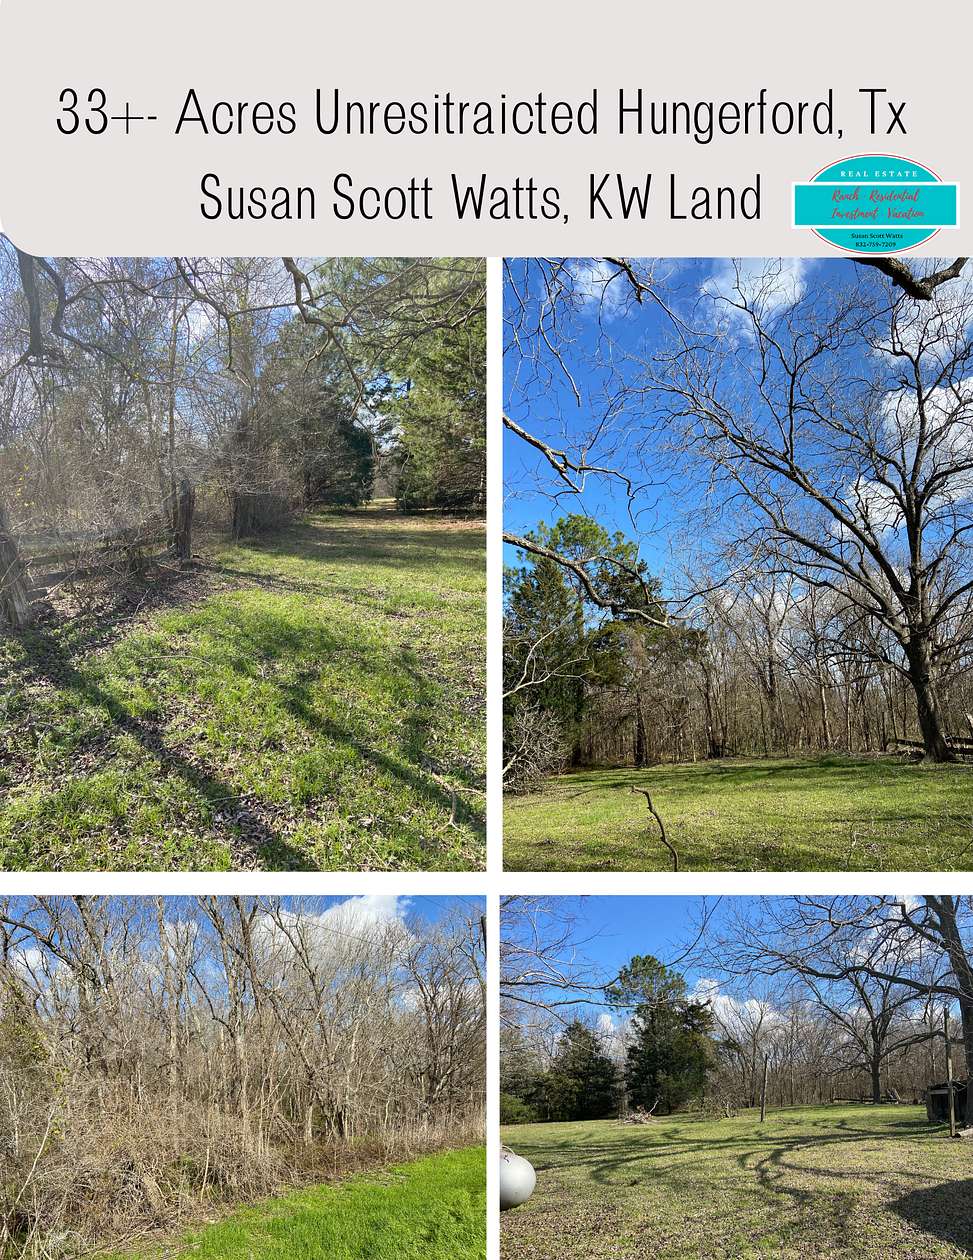 33 Acres of Land for Sale in Hungerford, Texas